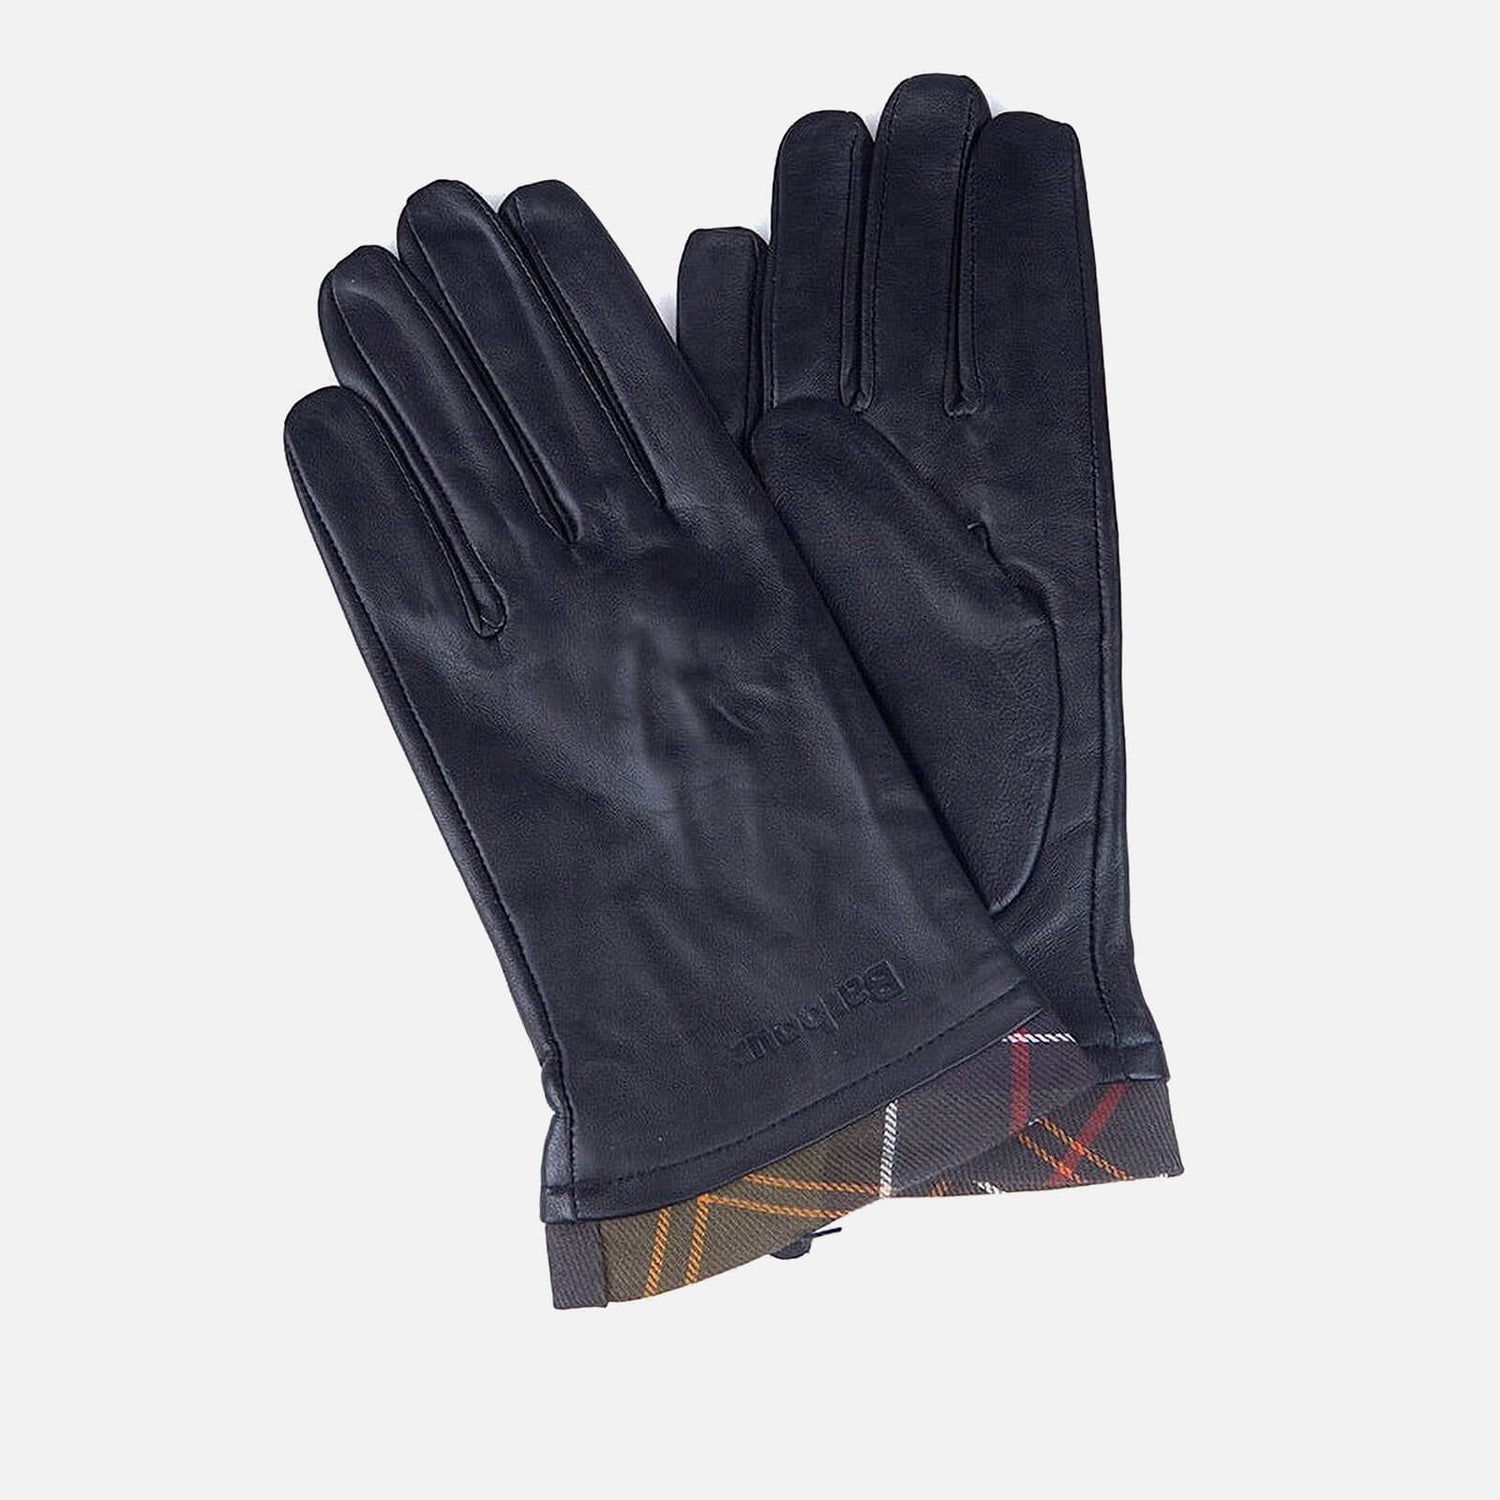 Barbour Women's Tartan Trimmed Leather Gloves - Black/Classic - S